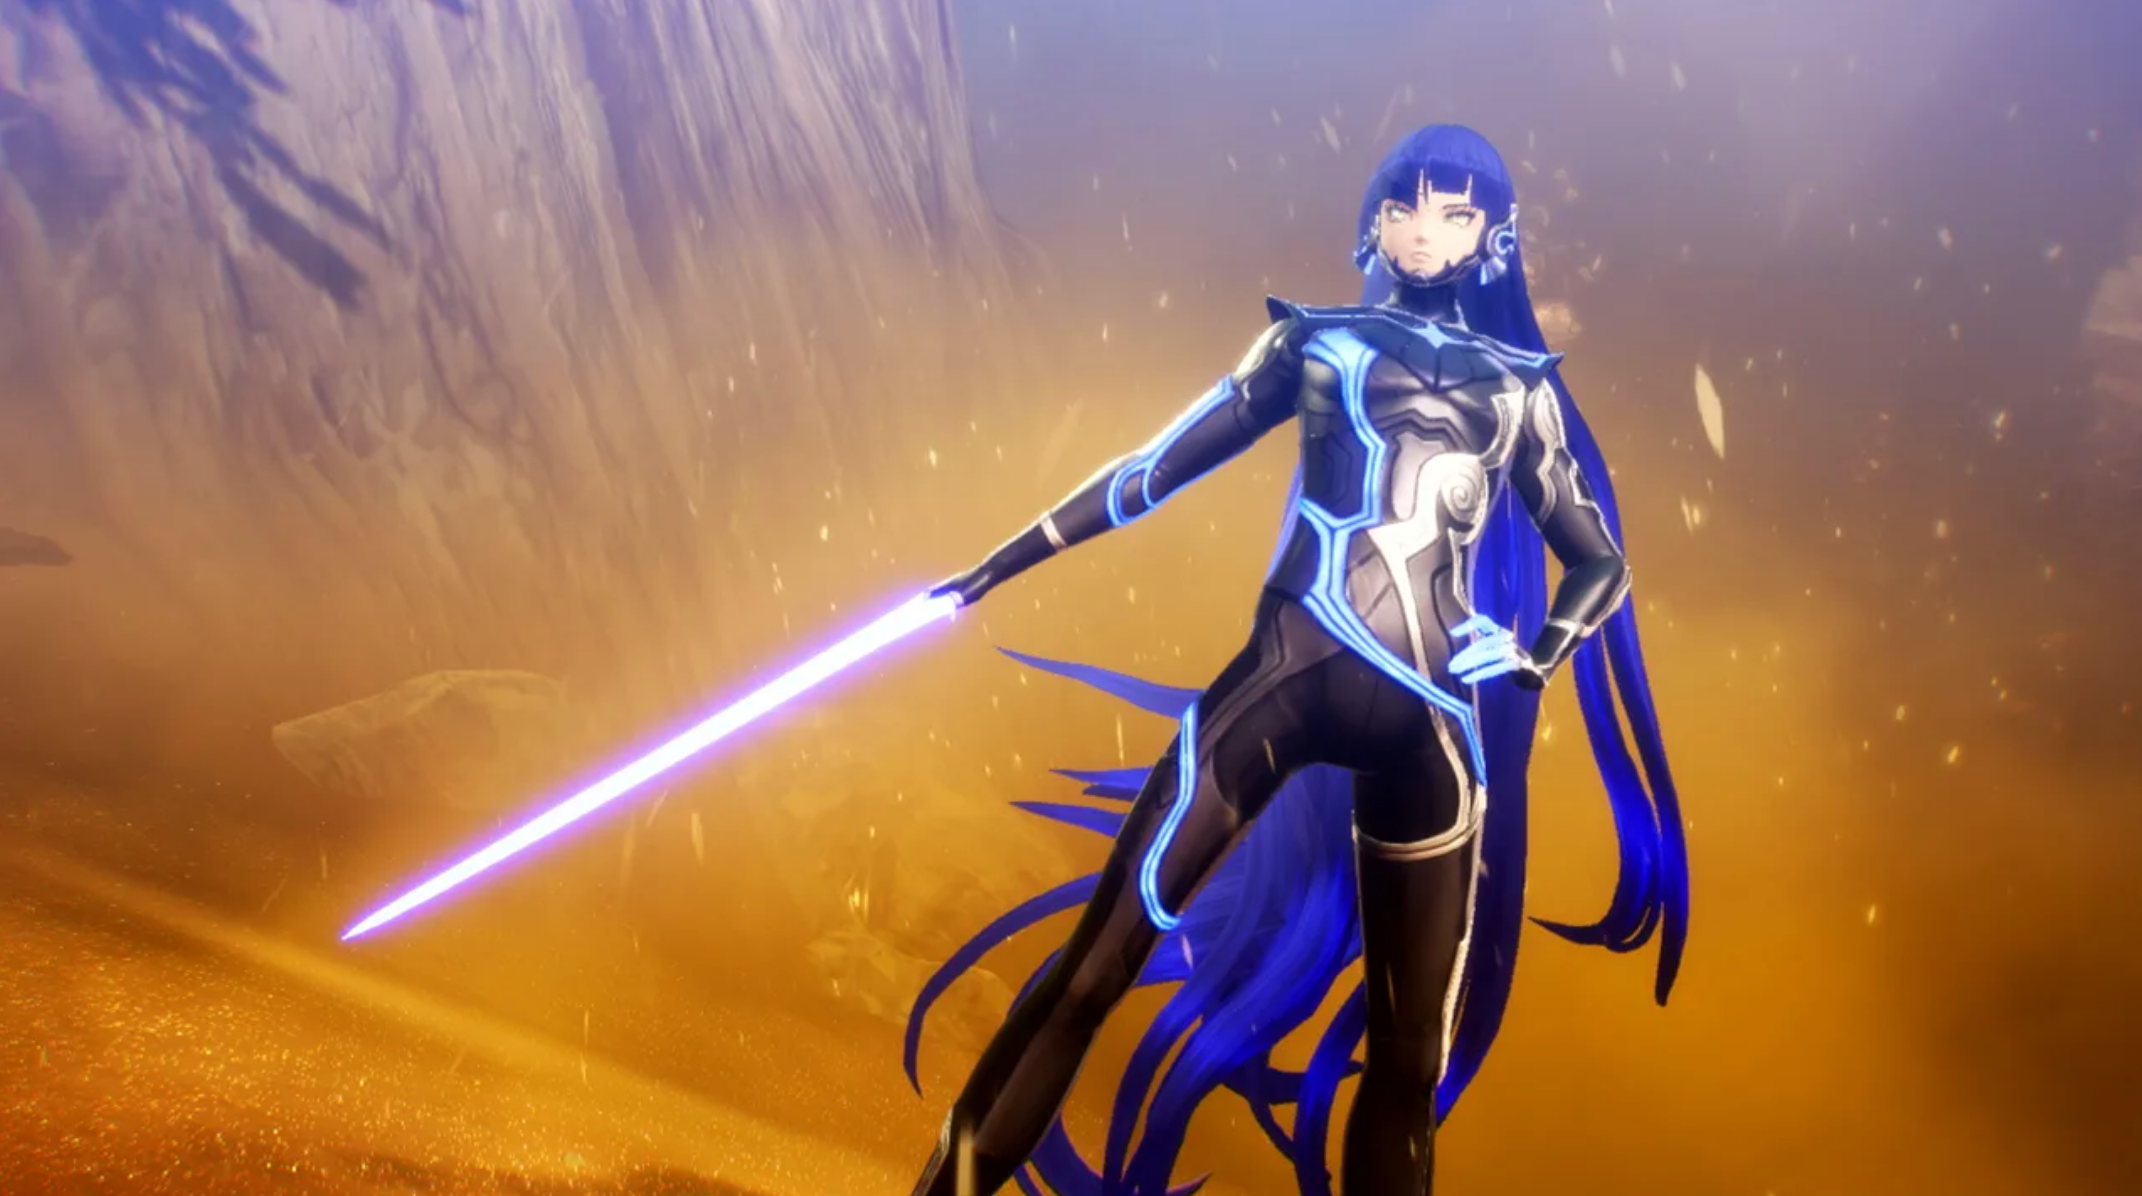 Image for Shin Megami Tensei 5 review - a brutal RPG that goes all-in on battles of attrition